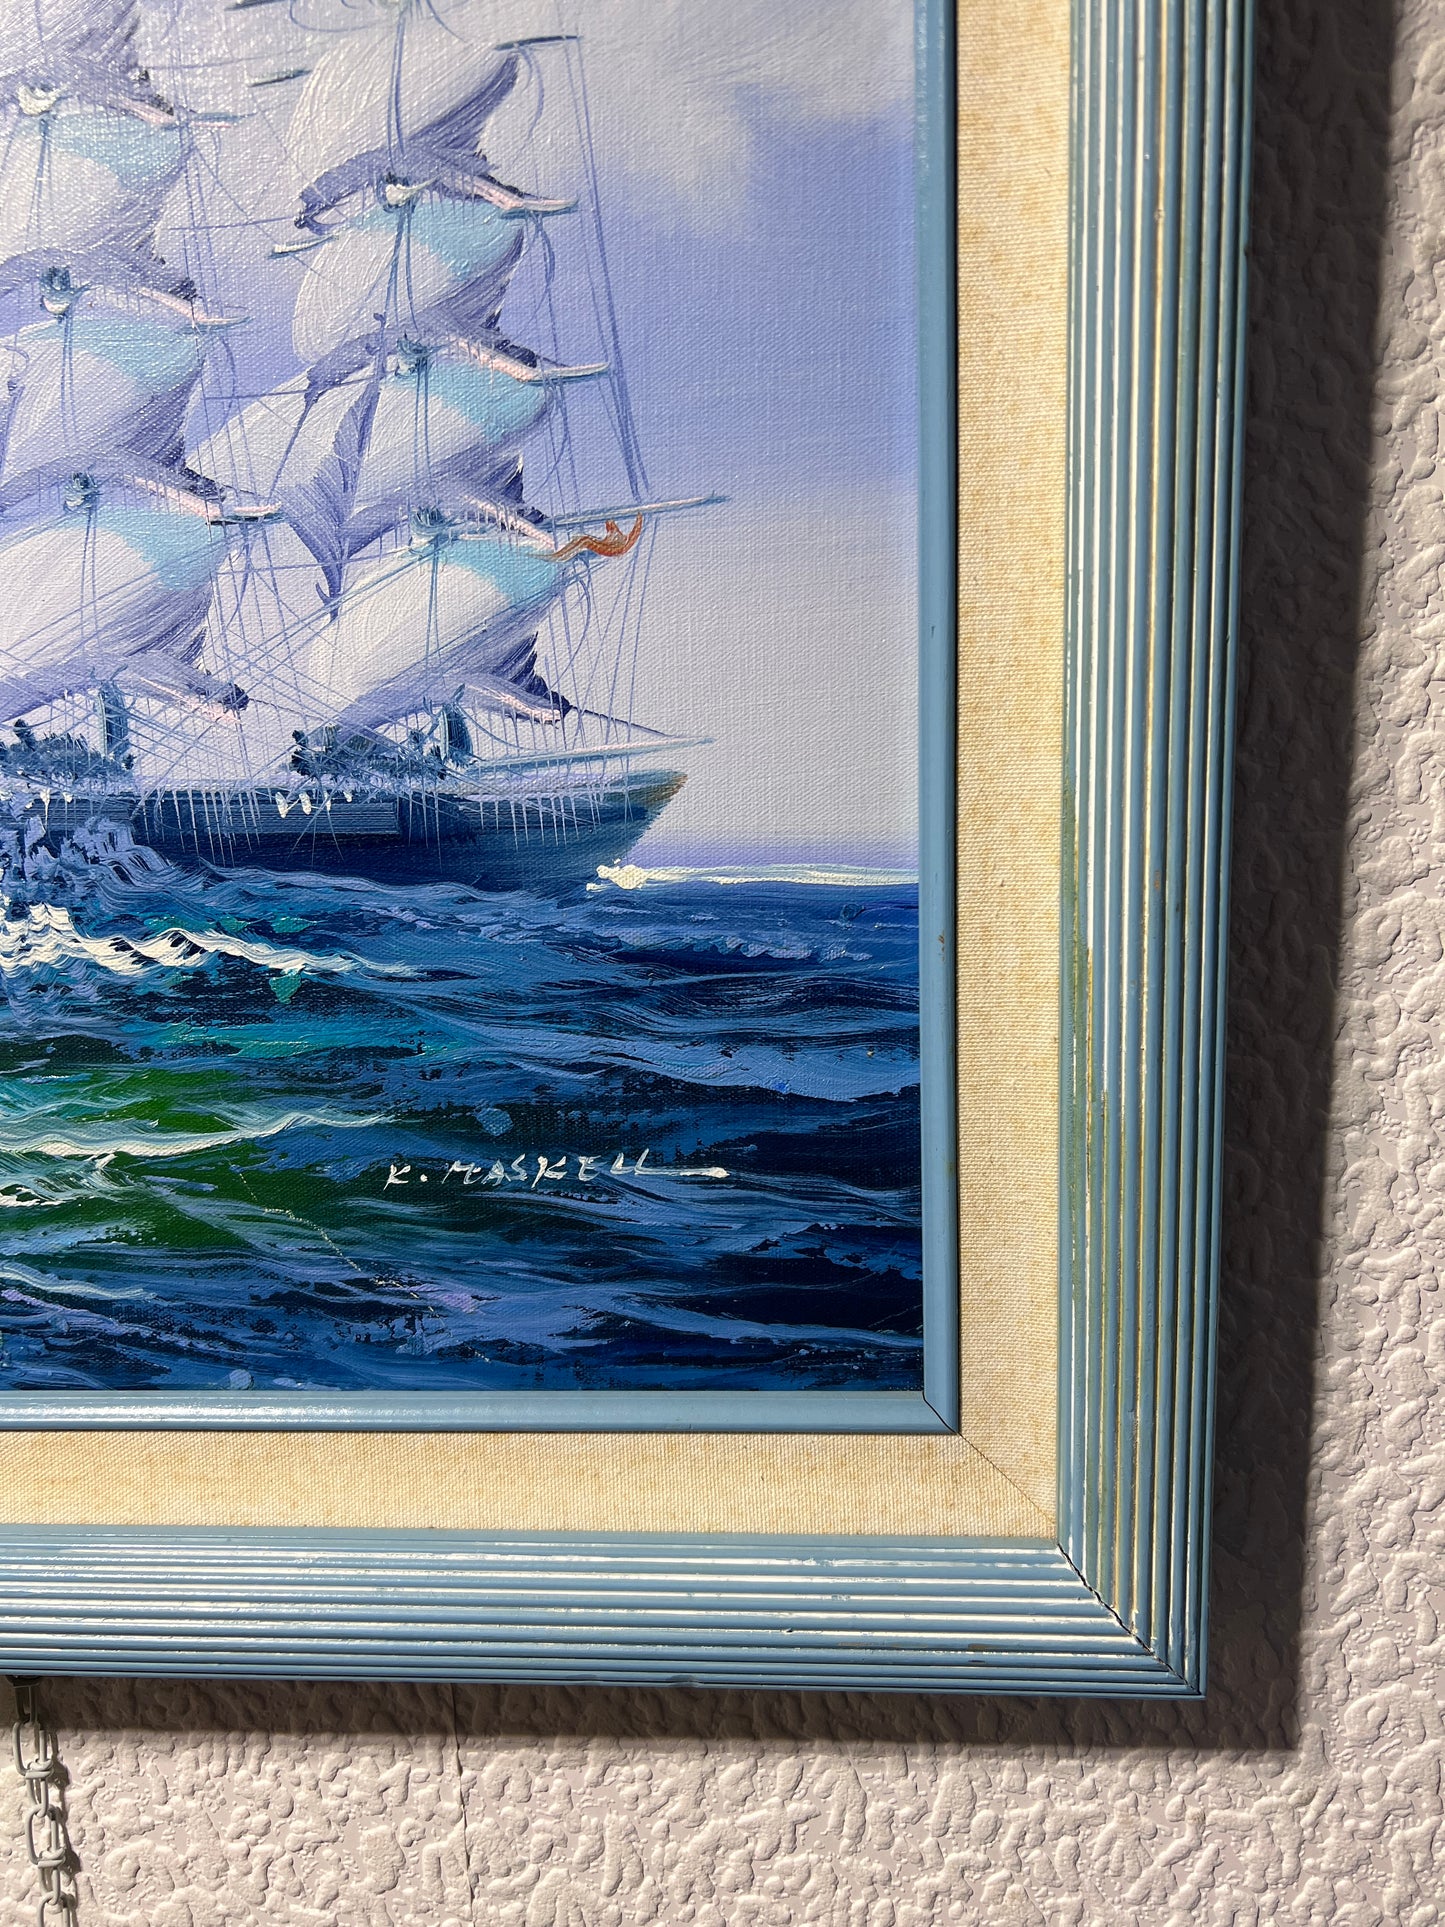 K.Maskell painting on canvas, seascape, Sailing Ship in the Ocean, Framed